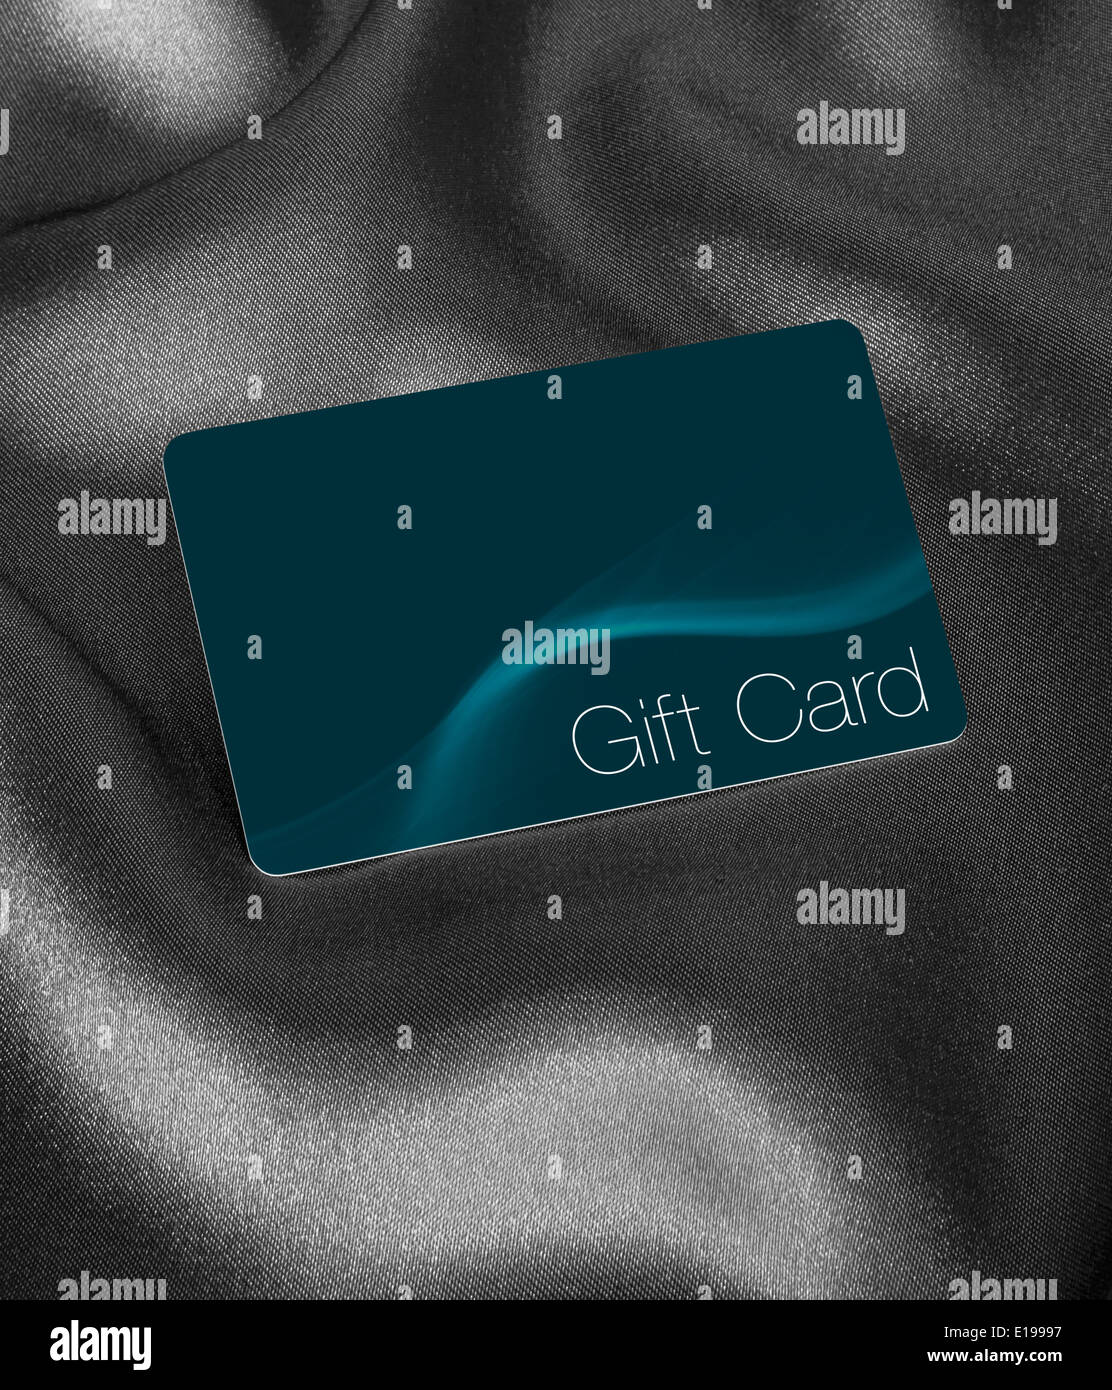 Store Gift Card now used instead of gift vouchers against a silk background with blank area for inserting your own brand or logo Stock Photo